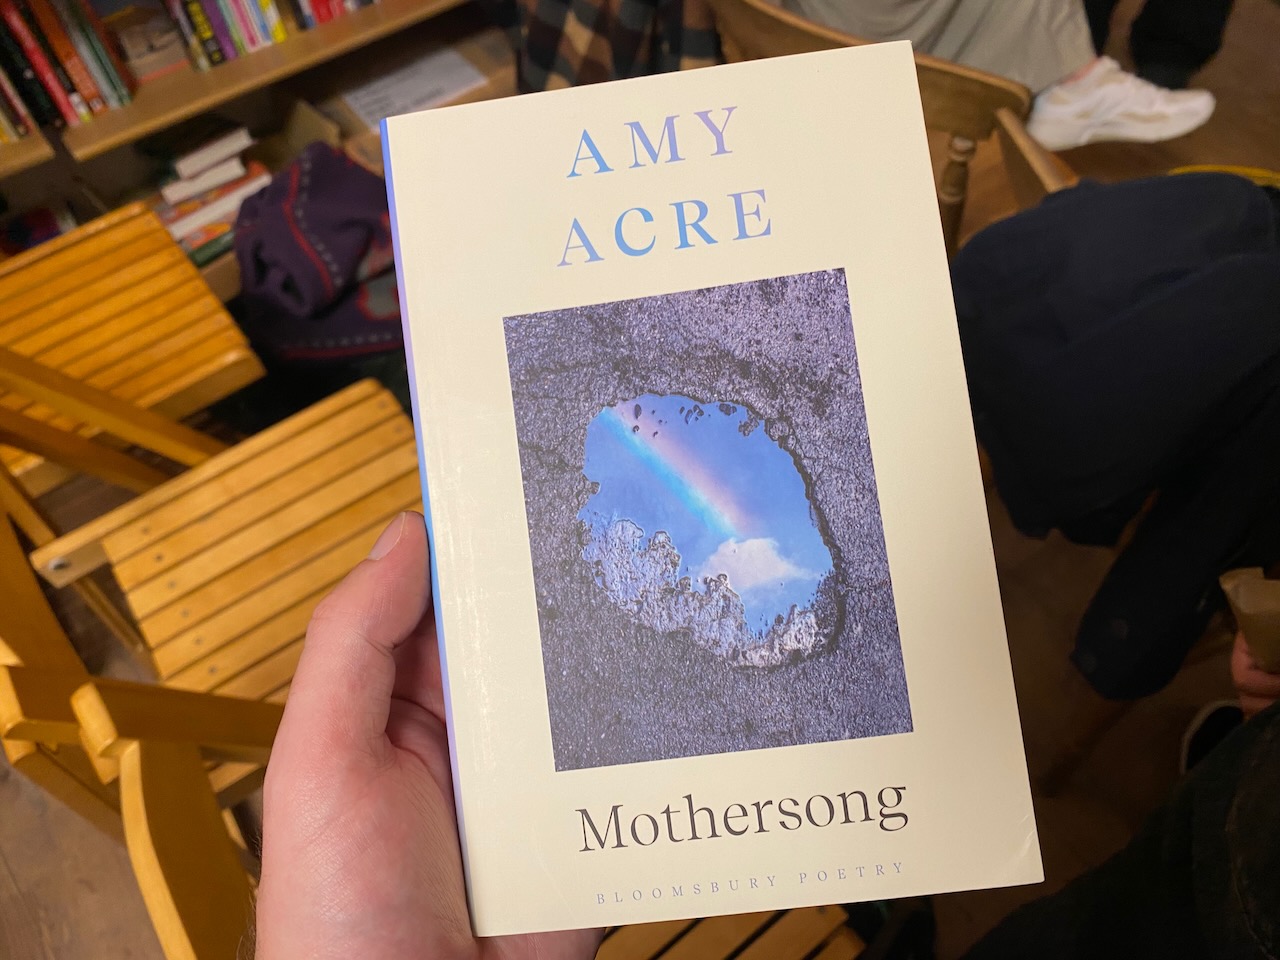 My copy of Mothersong